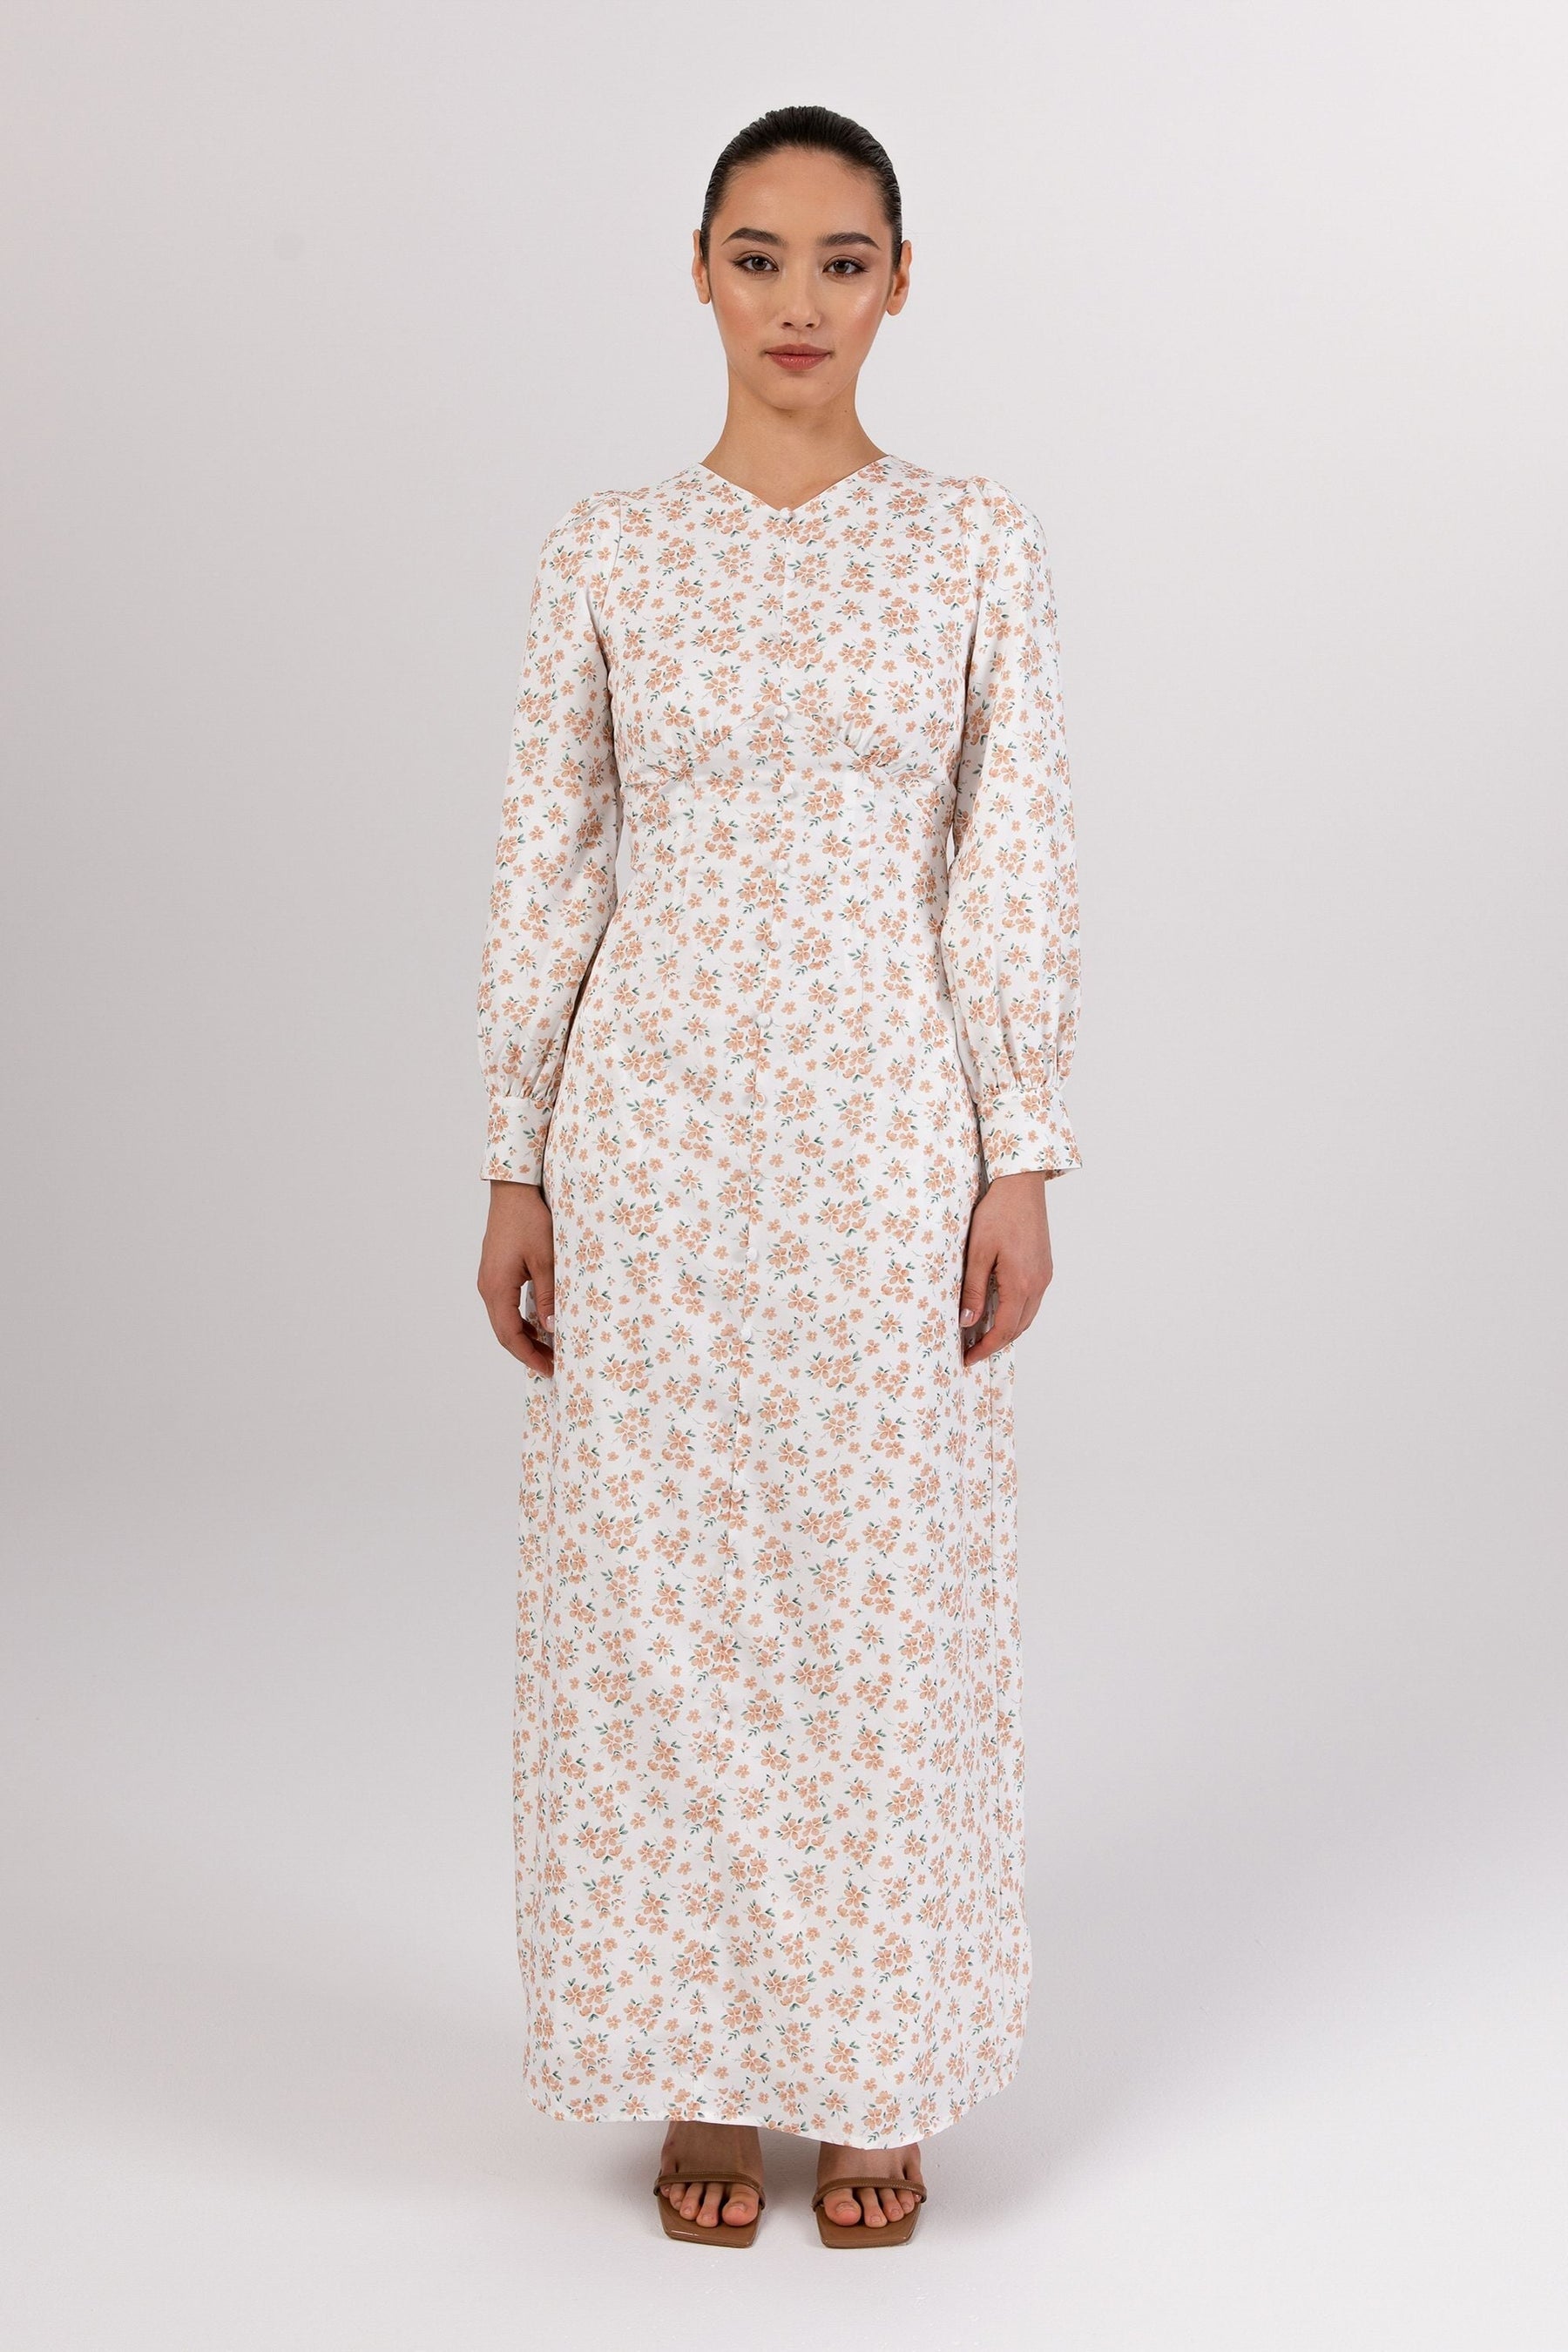 Anaya Button Front Maxi Dress - White Floral Veiled 